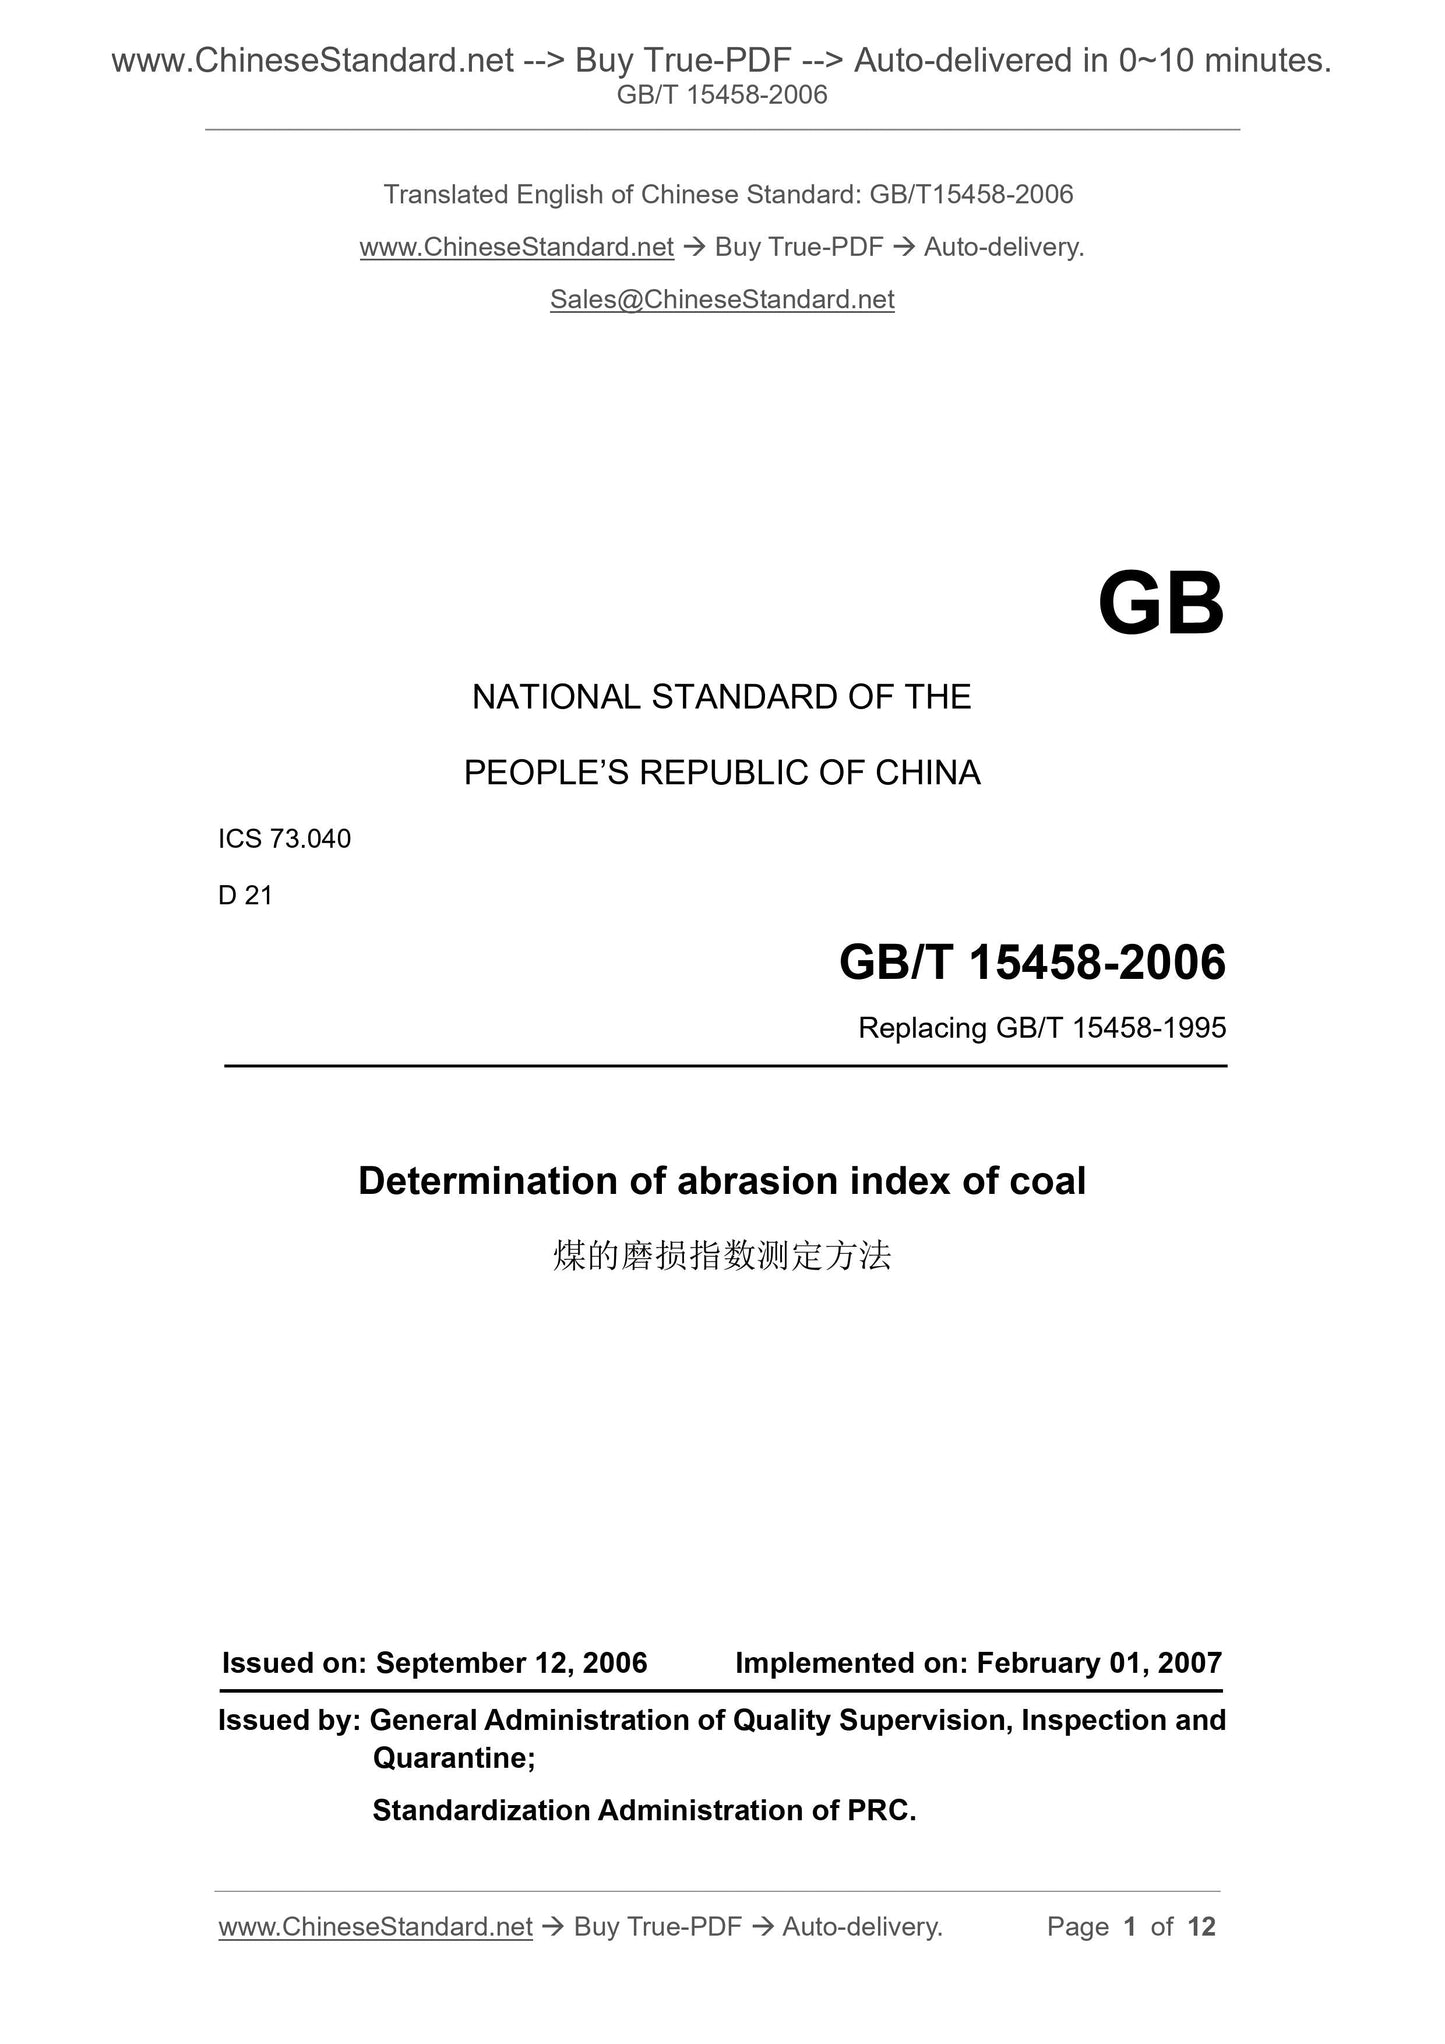 GB/T 15458-2006 Page 1